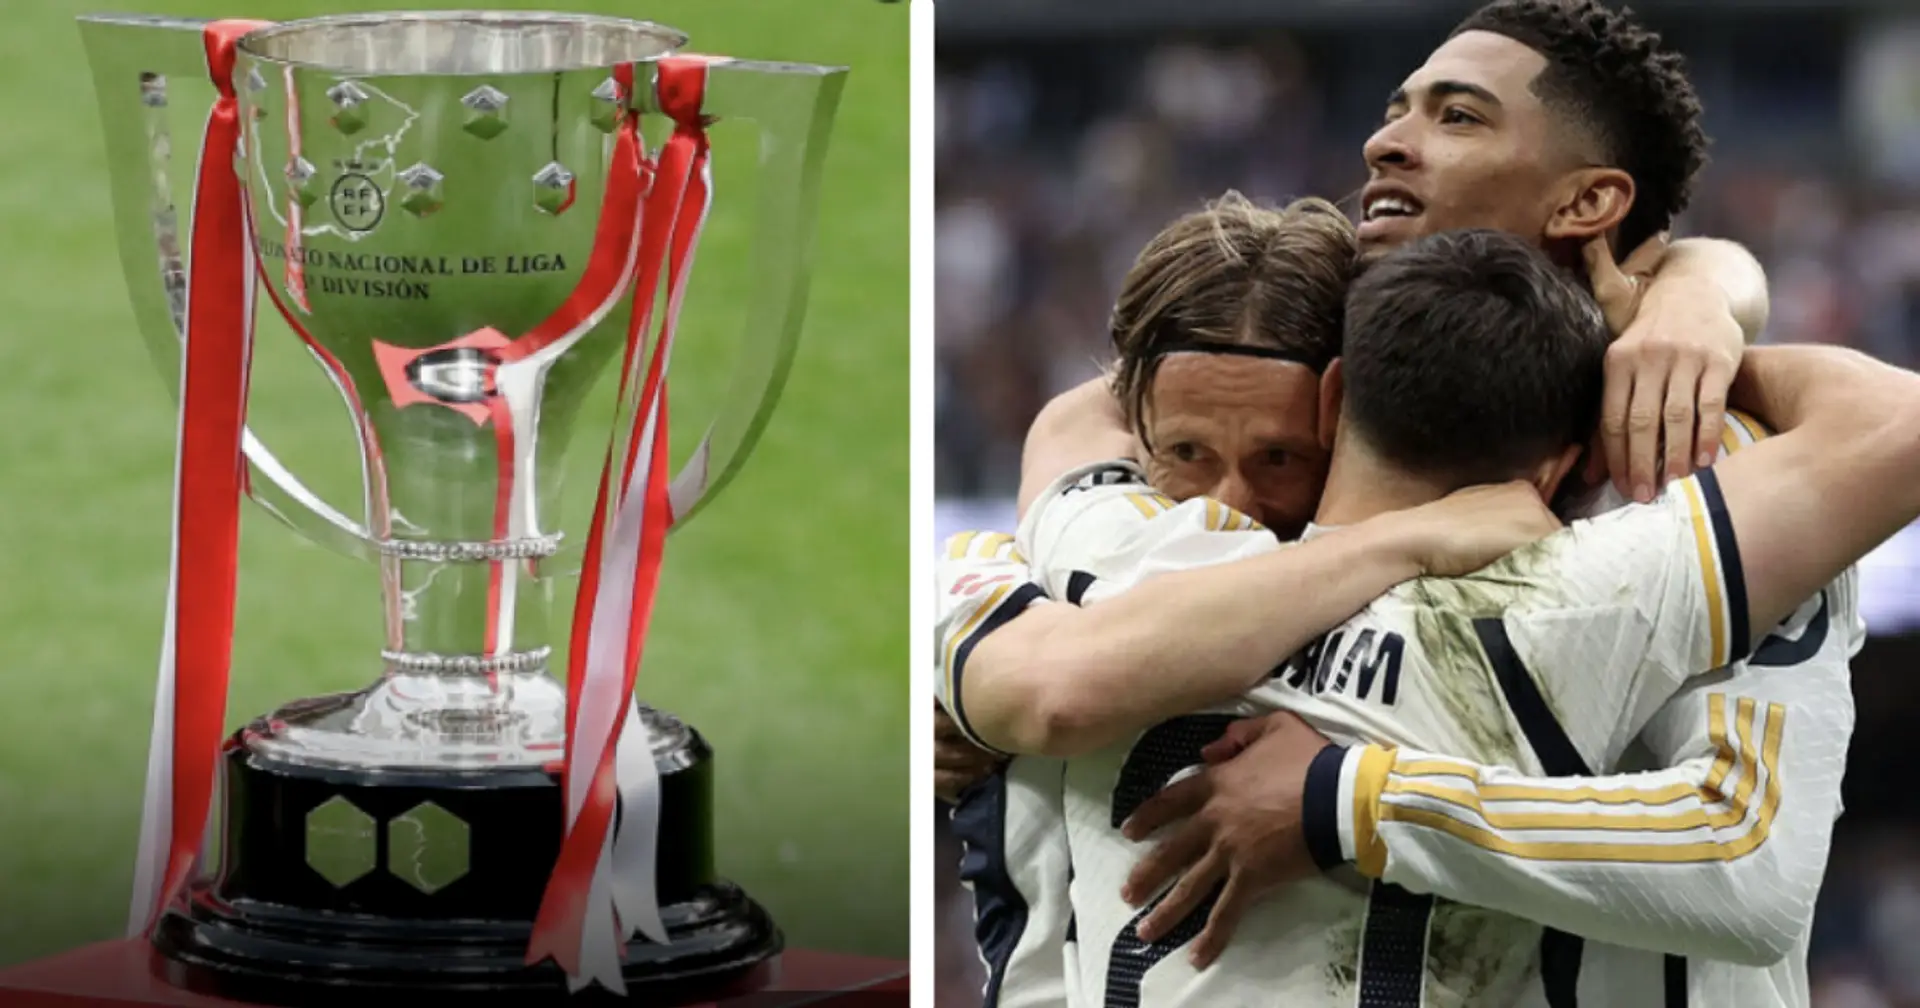 What's the difference in number of La Liga titles won between Real Madrid and Barcelona?